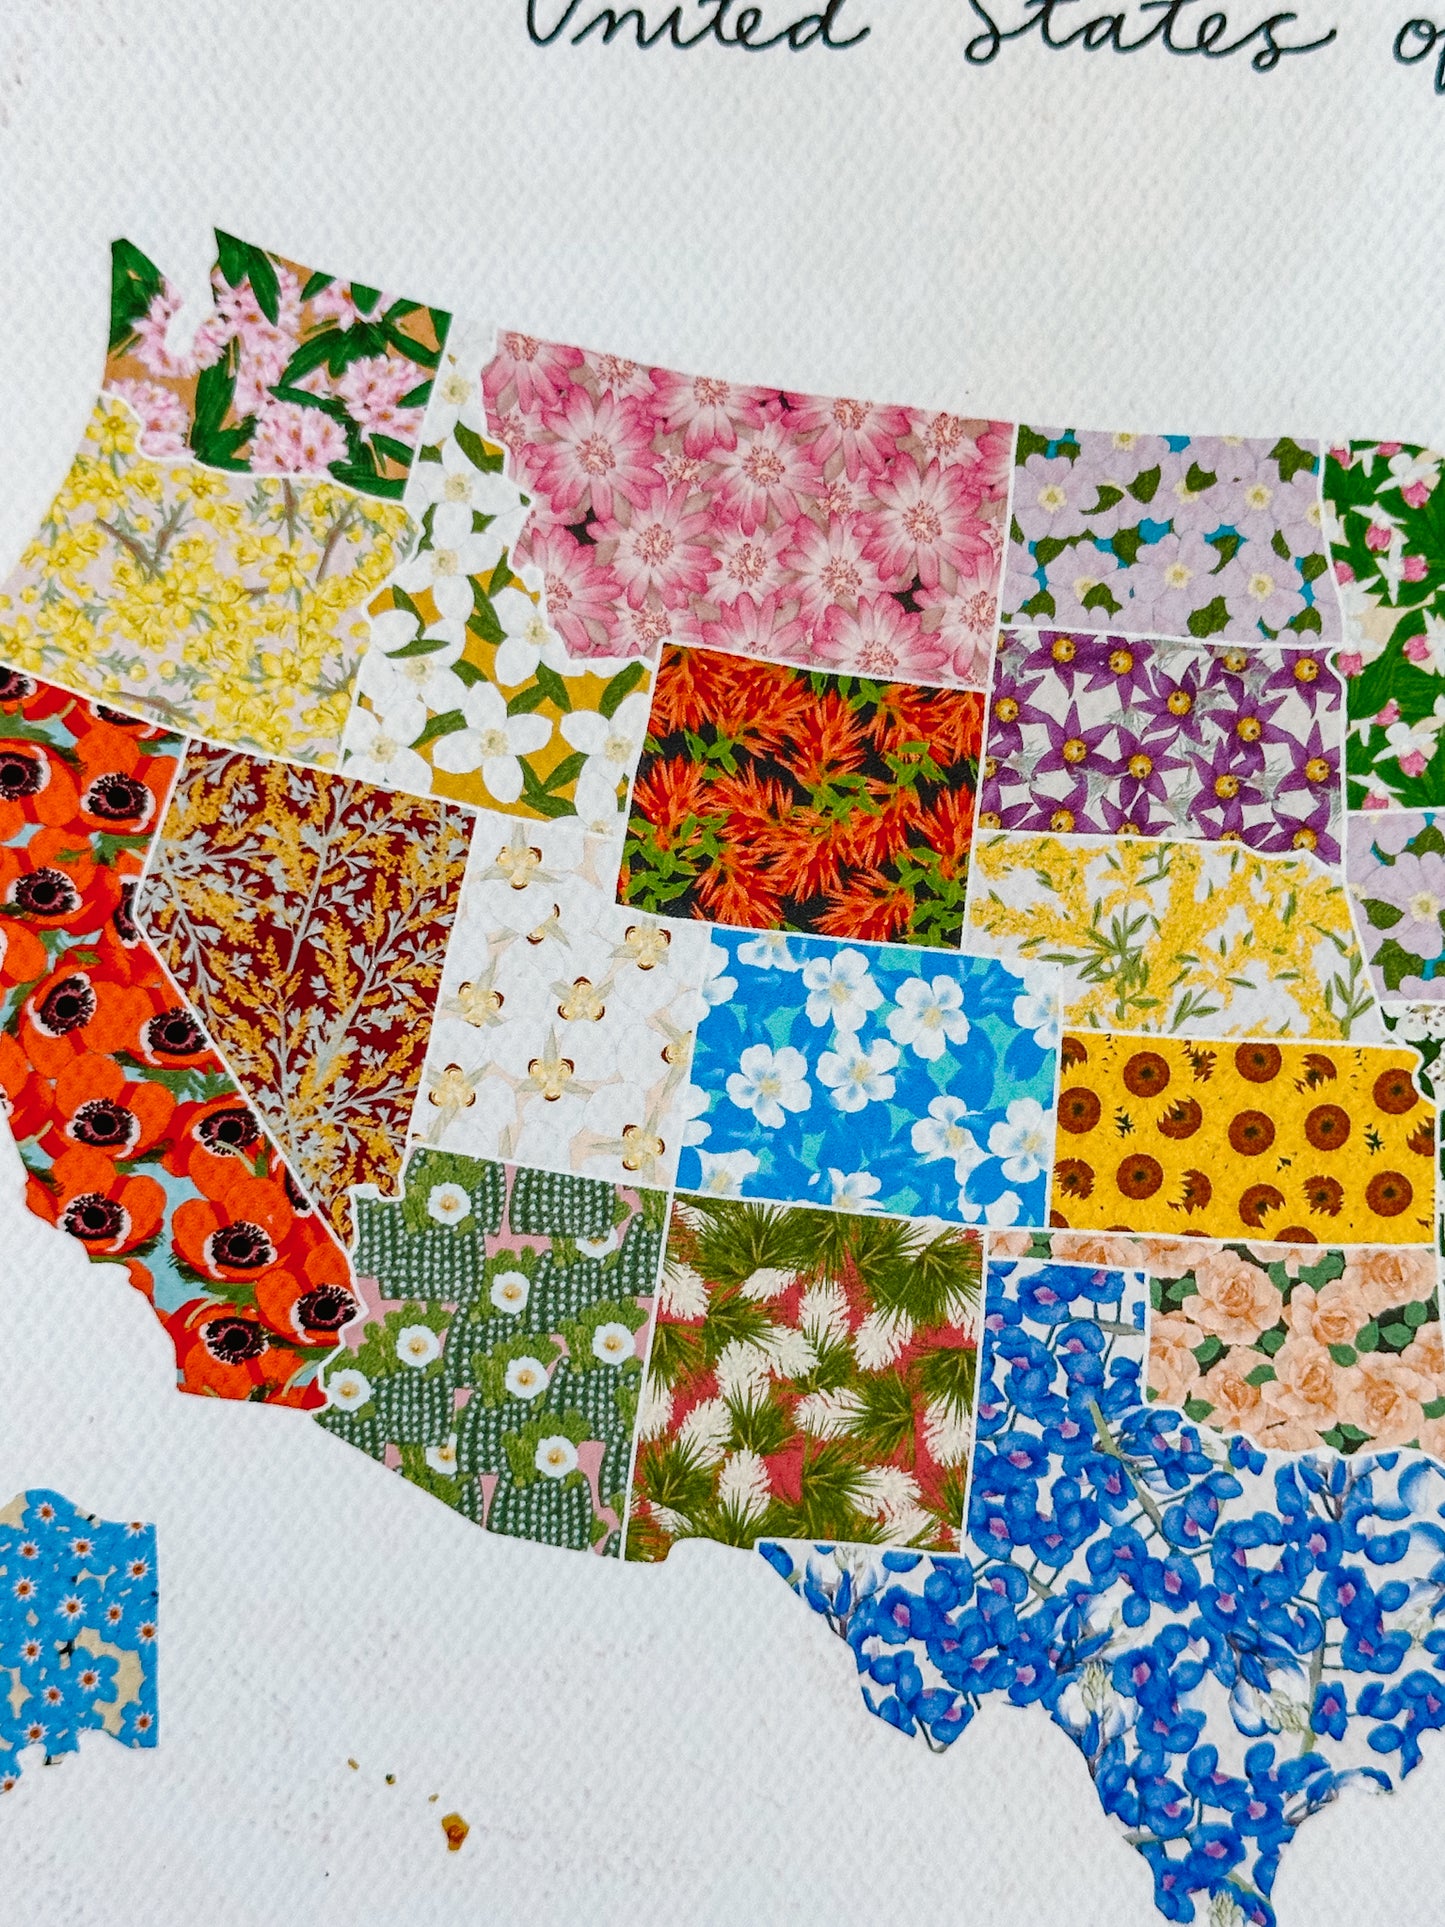 U.S.A. States Floral Map